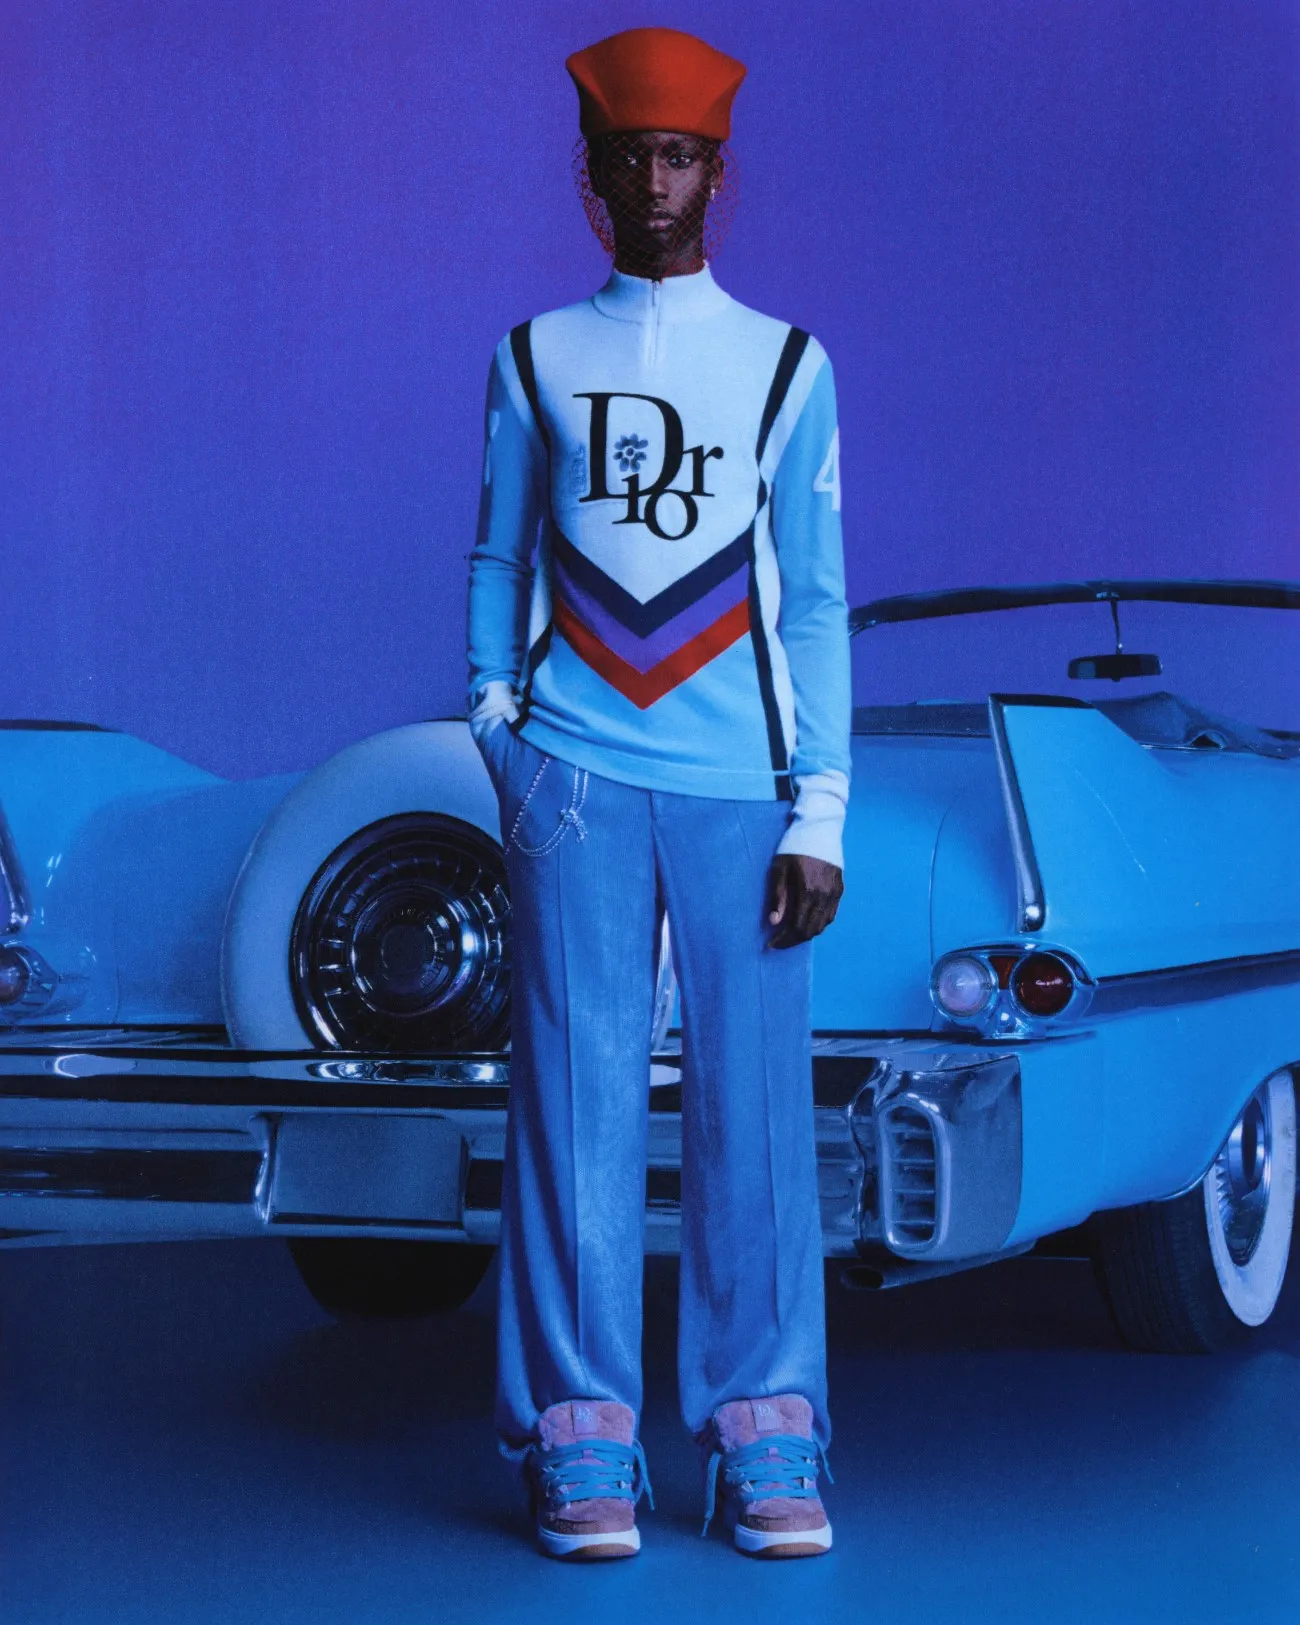 Dior Men x ERL, the Cruise 2023 “California Couture” unveiled